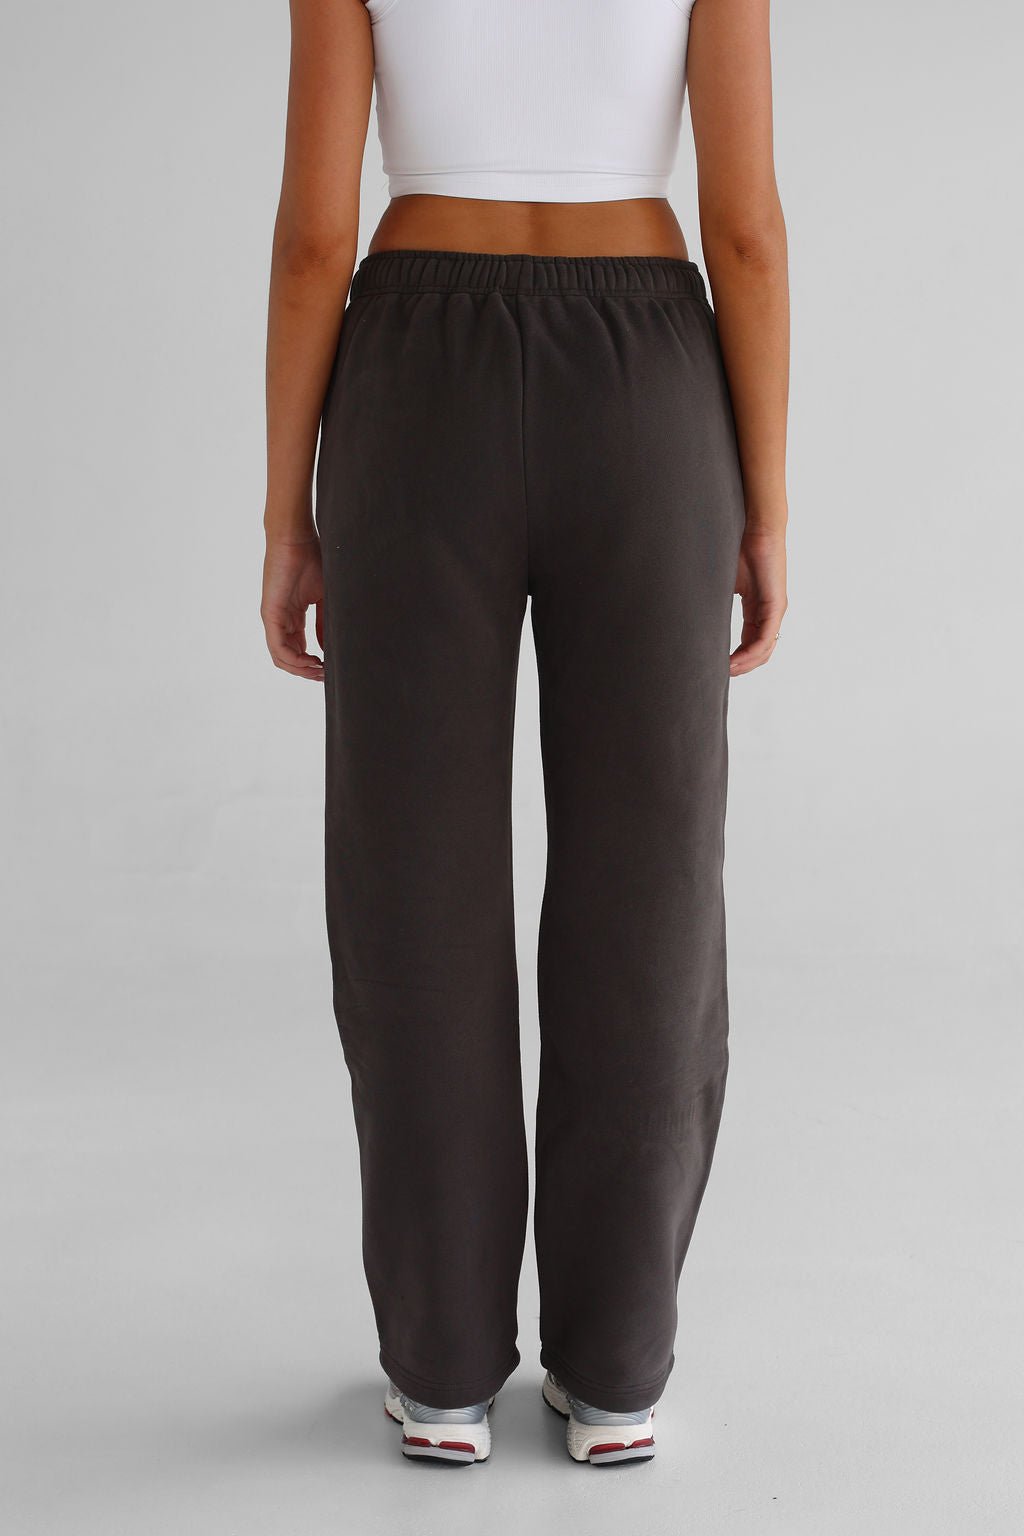 The Pilates Collection Relaxed Fit Sweatpants - Ash - LEELO ACTIVE